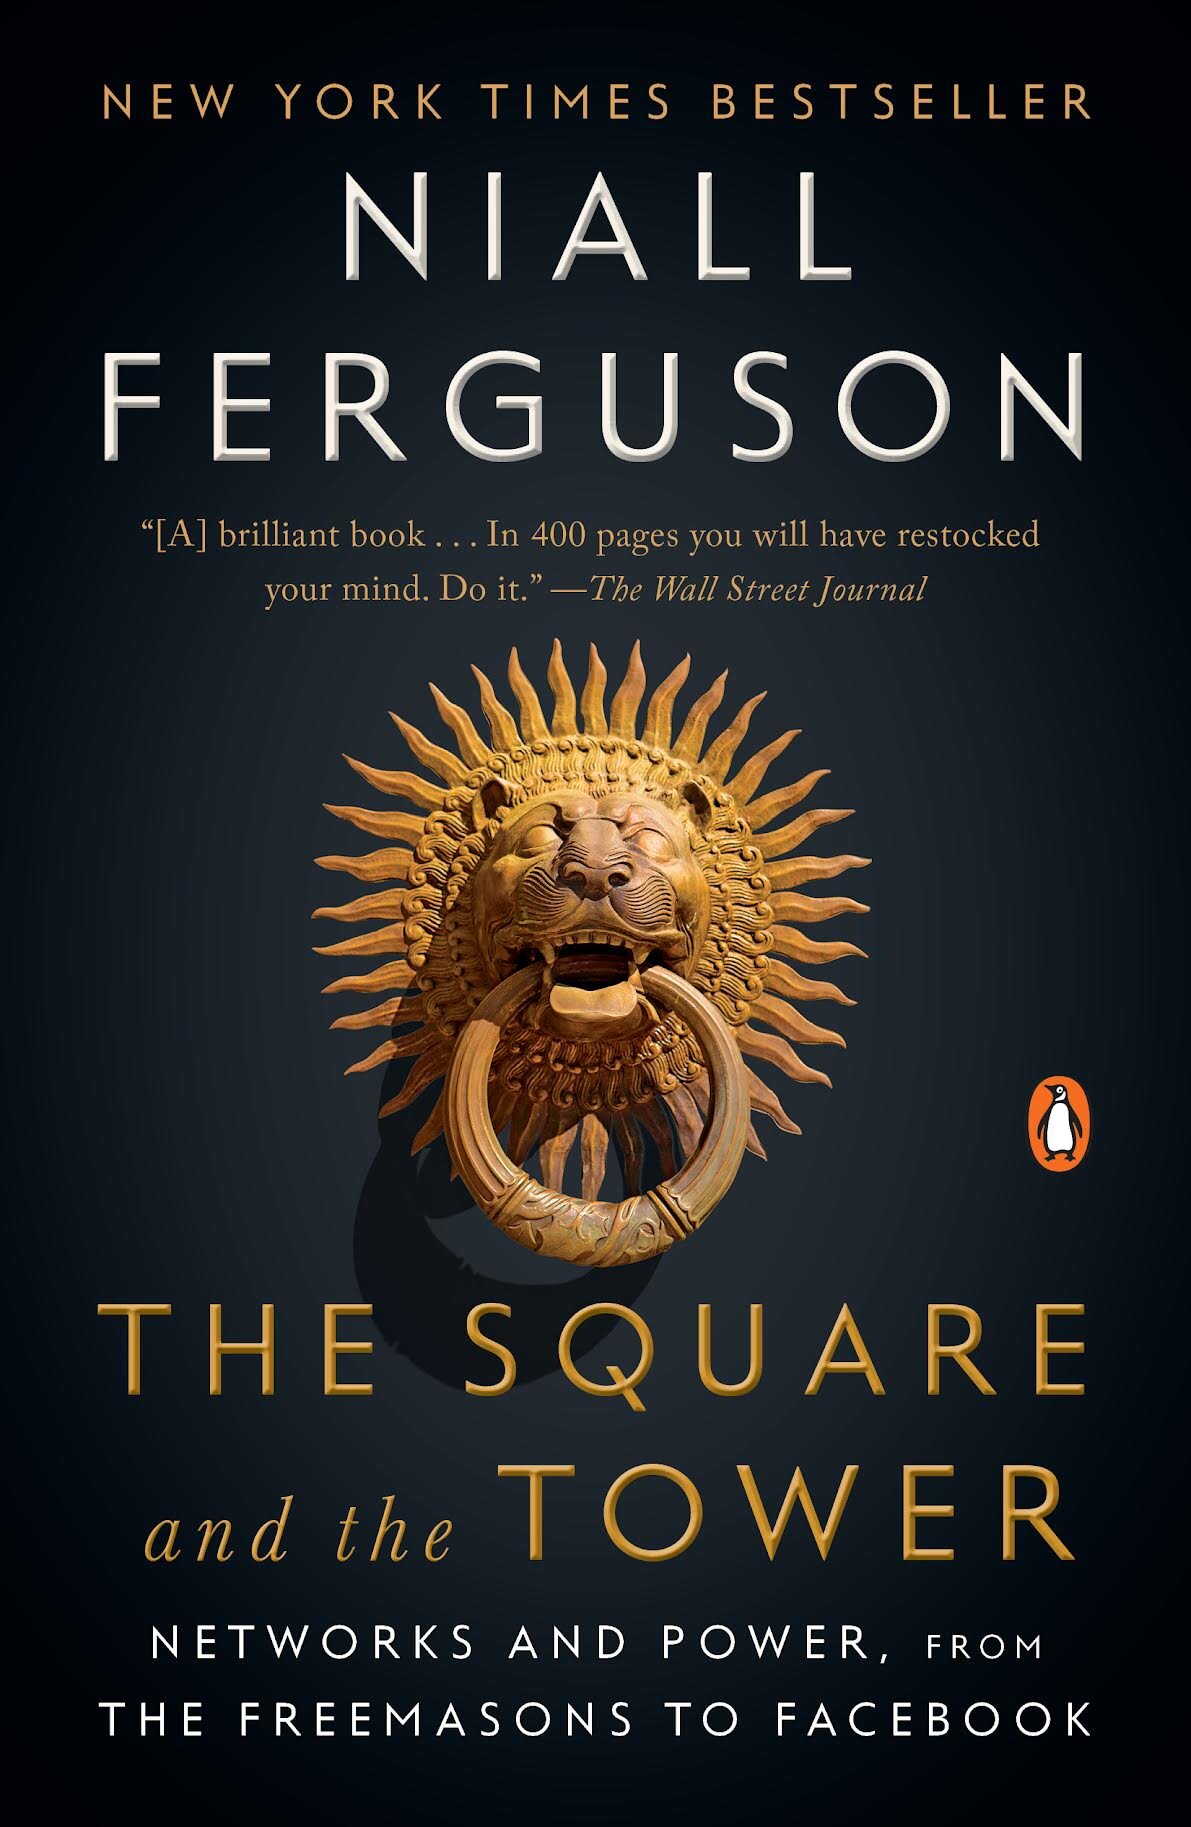 The Square and the Tower — NIALL FERGUSON